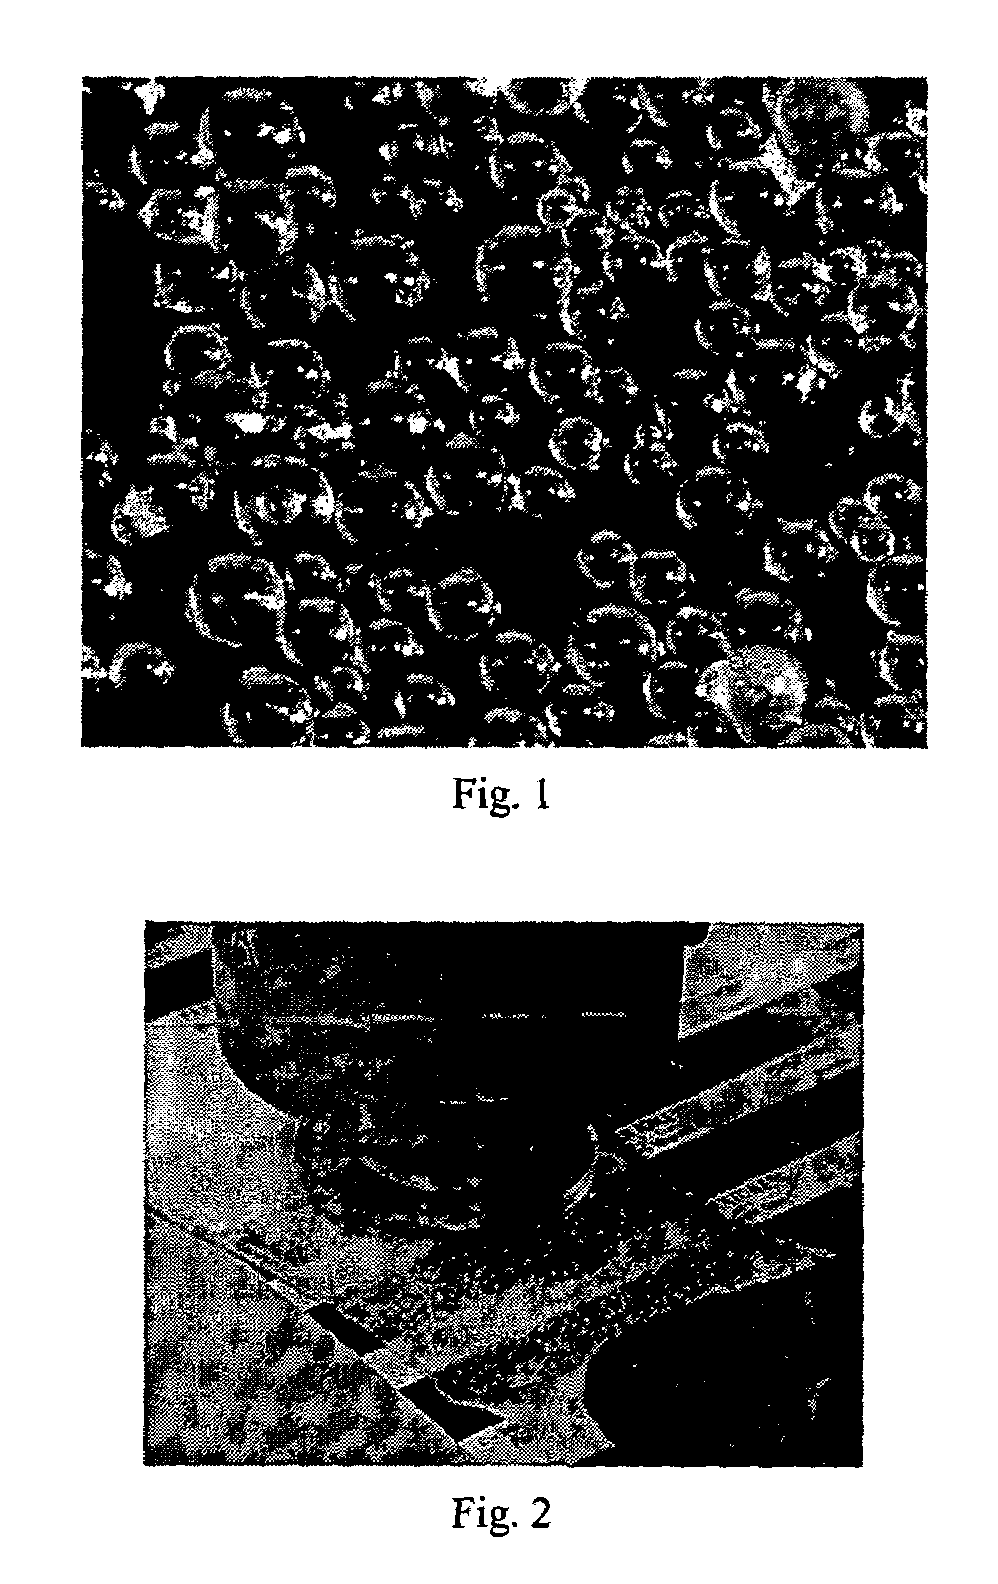 Liquid absorbent thermoplastic composition comprising superabsorbent material particles of substantially angle-lacking shape